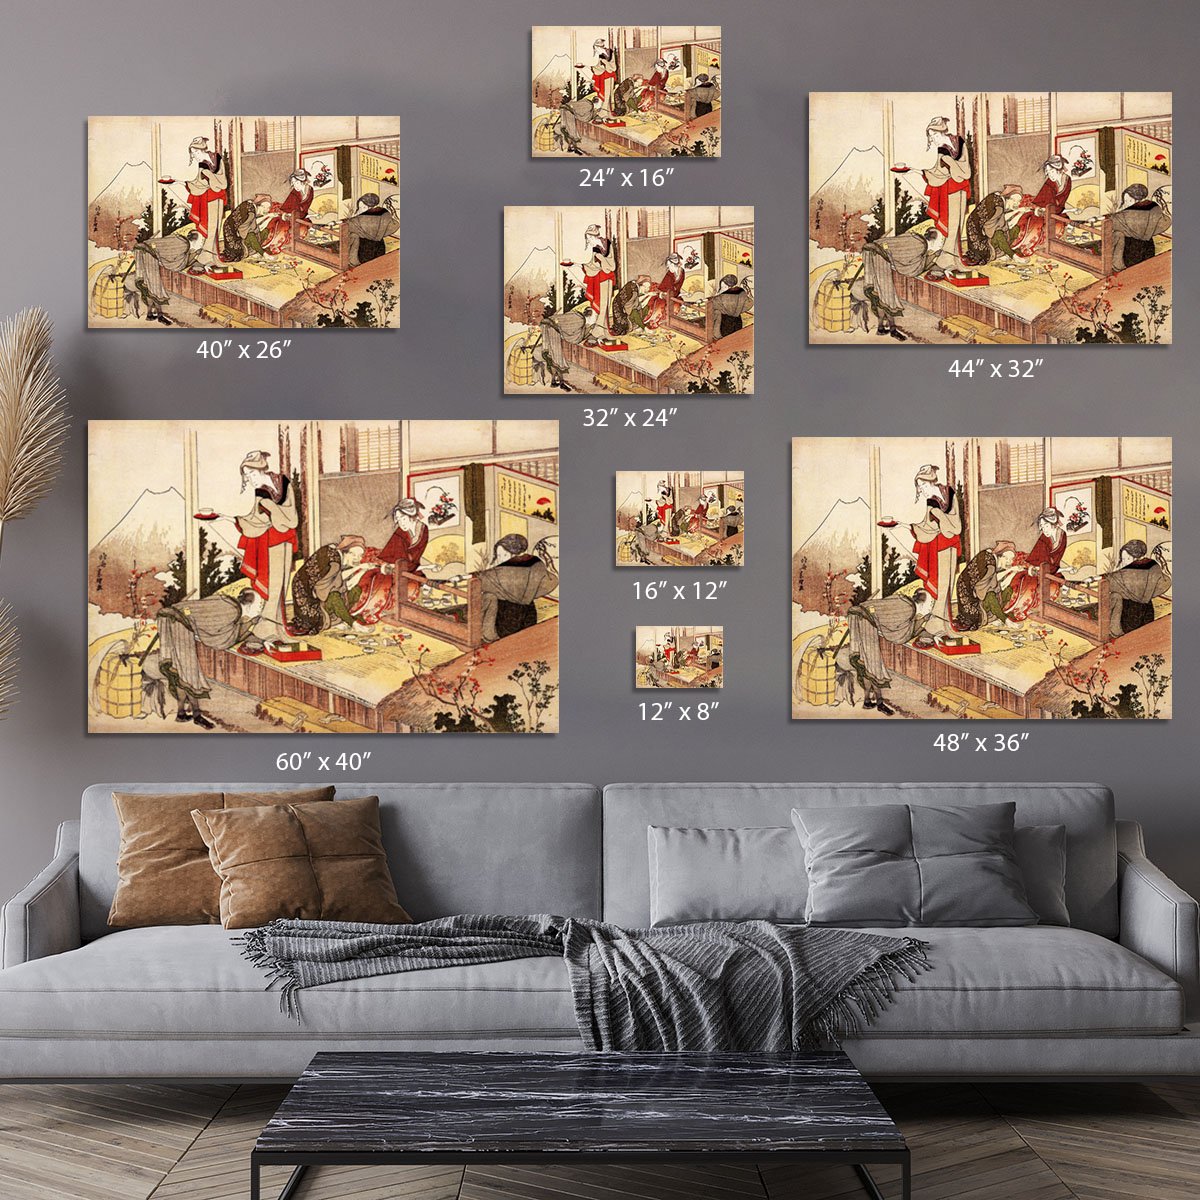 The studio of Netsuke by Hokusai Canvas Print or Poster